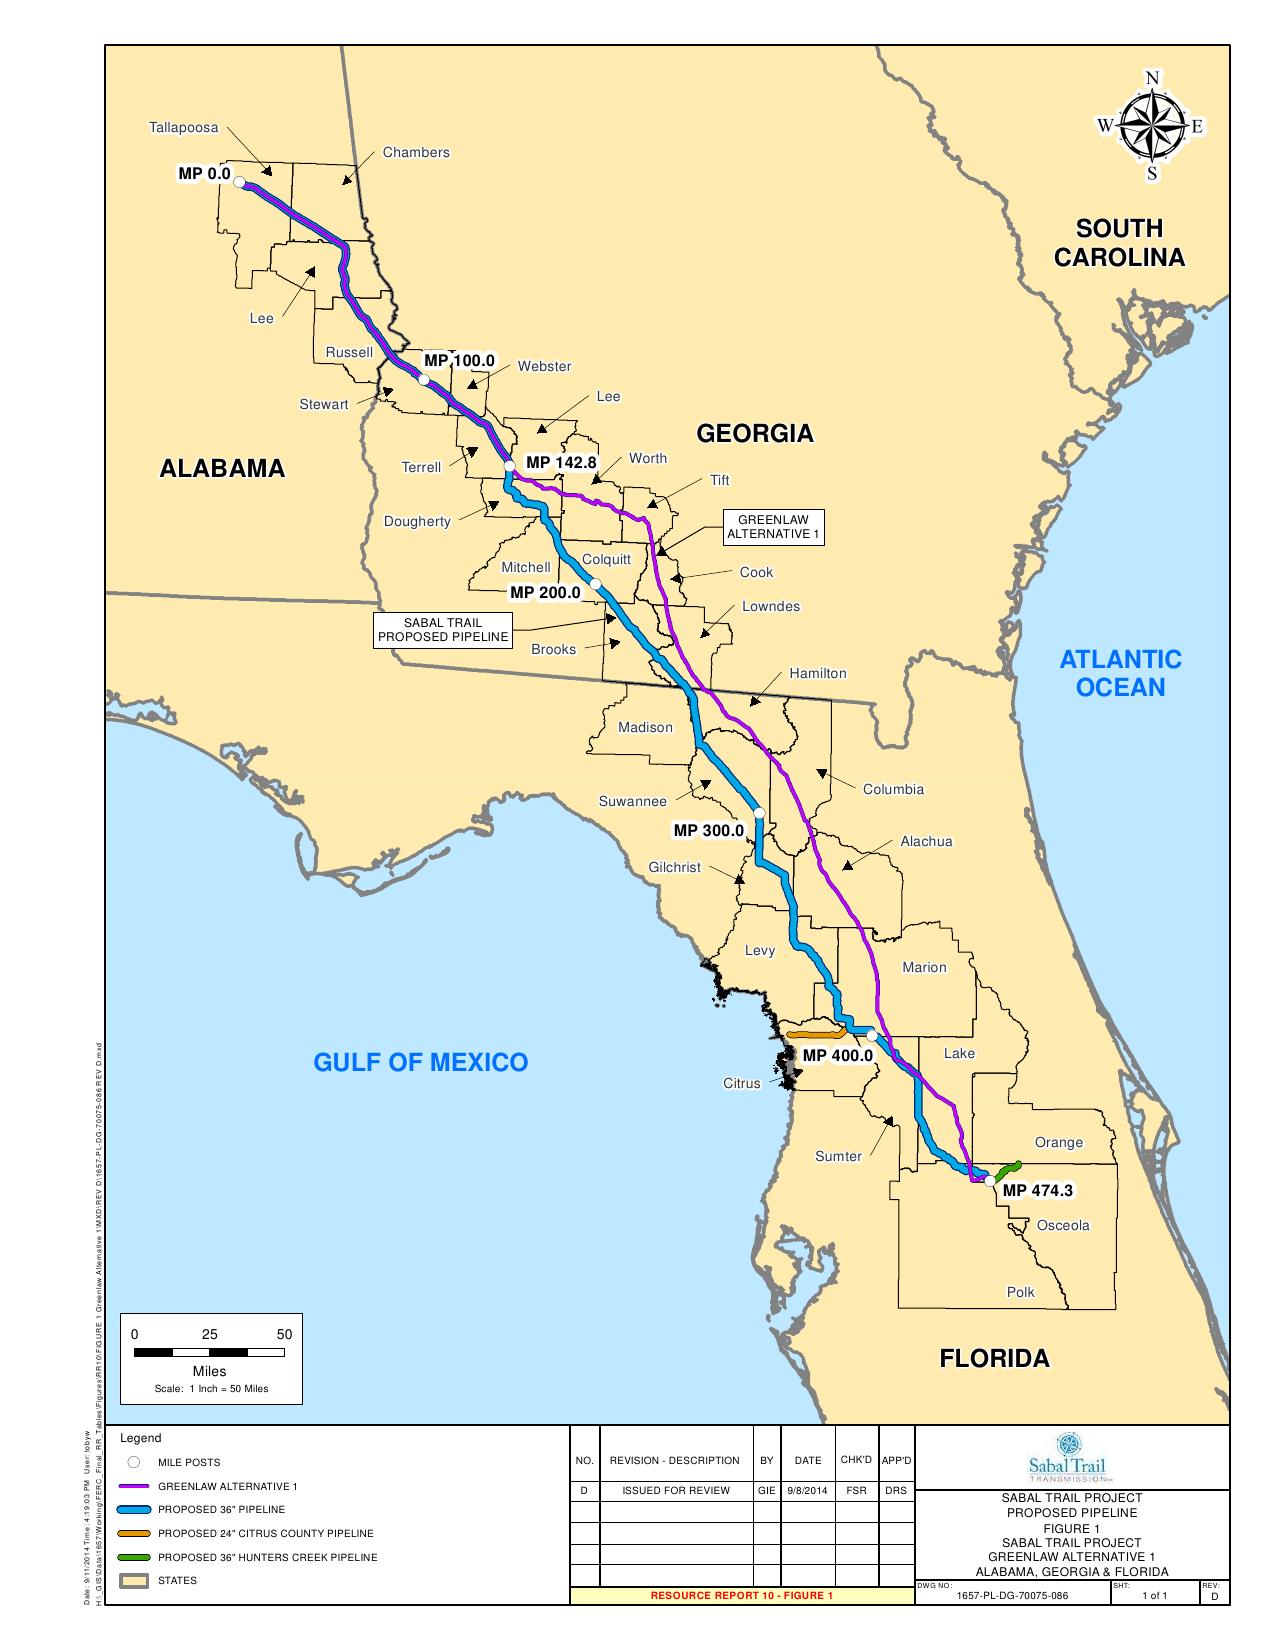 1275x1650 GreenLaw Alternative 1, in Response to FERC directive of 26 August 2014, by Sabal Trail Transmission, for SpectraBusters.org, 15 September 2014